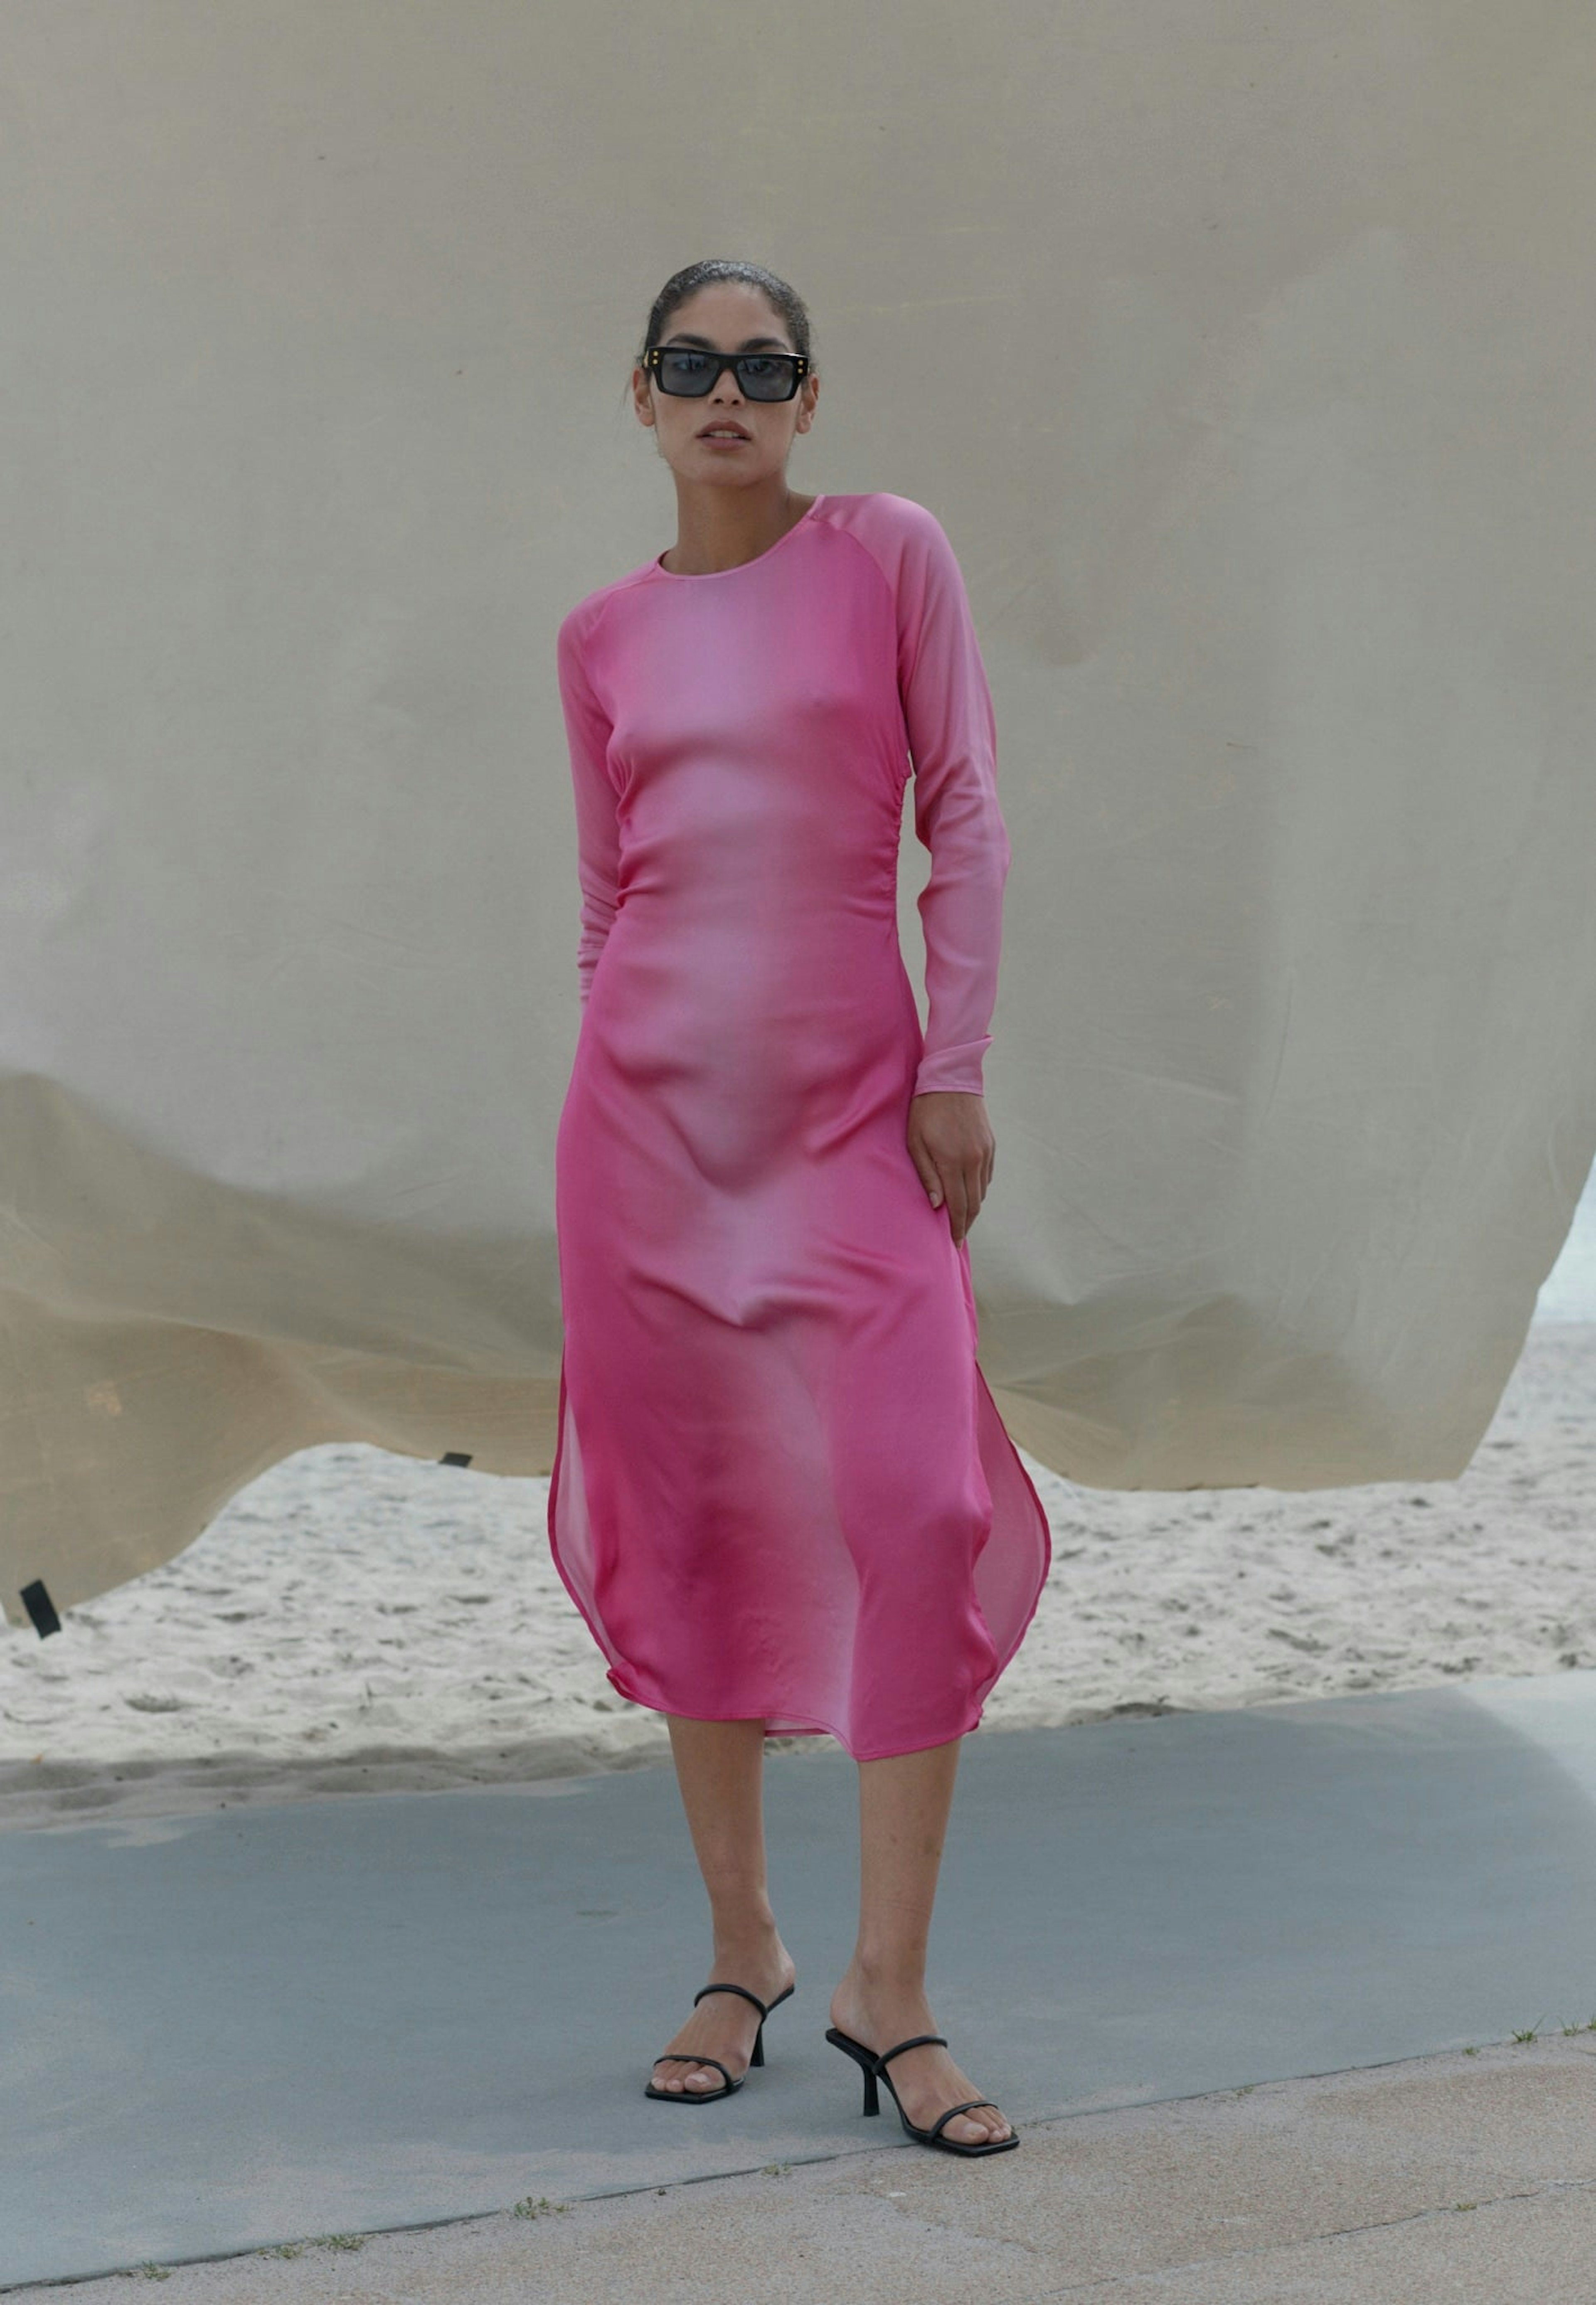 Shop Ava Dress - Reflex Pink from HERSKIND at Seezona